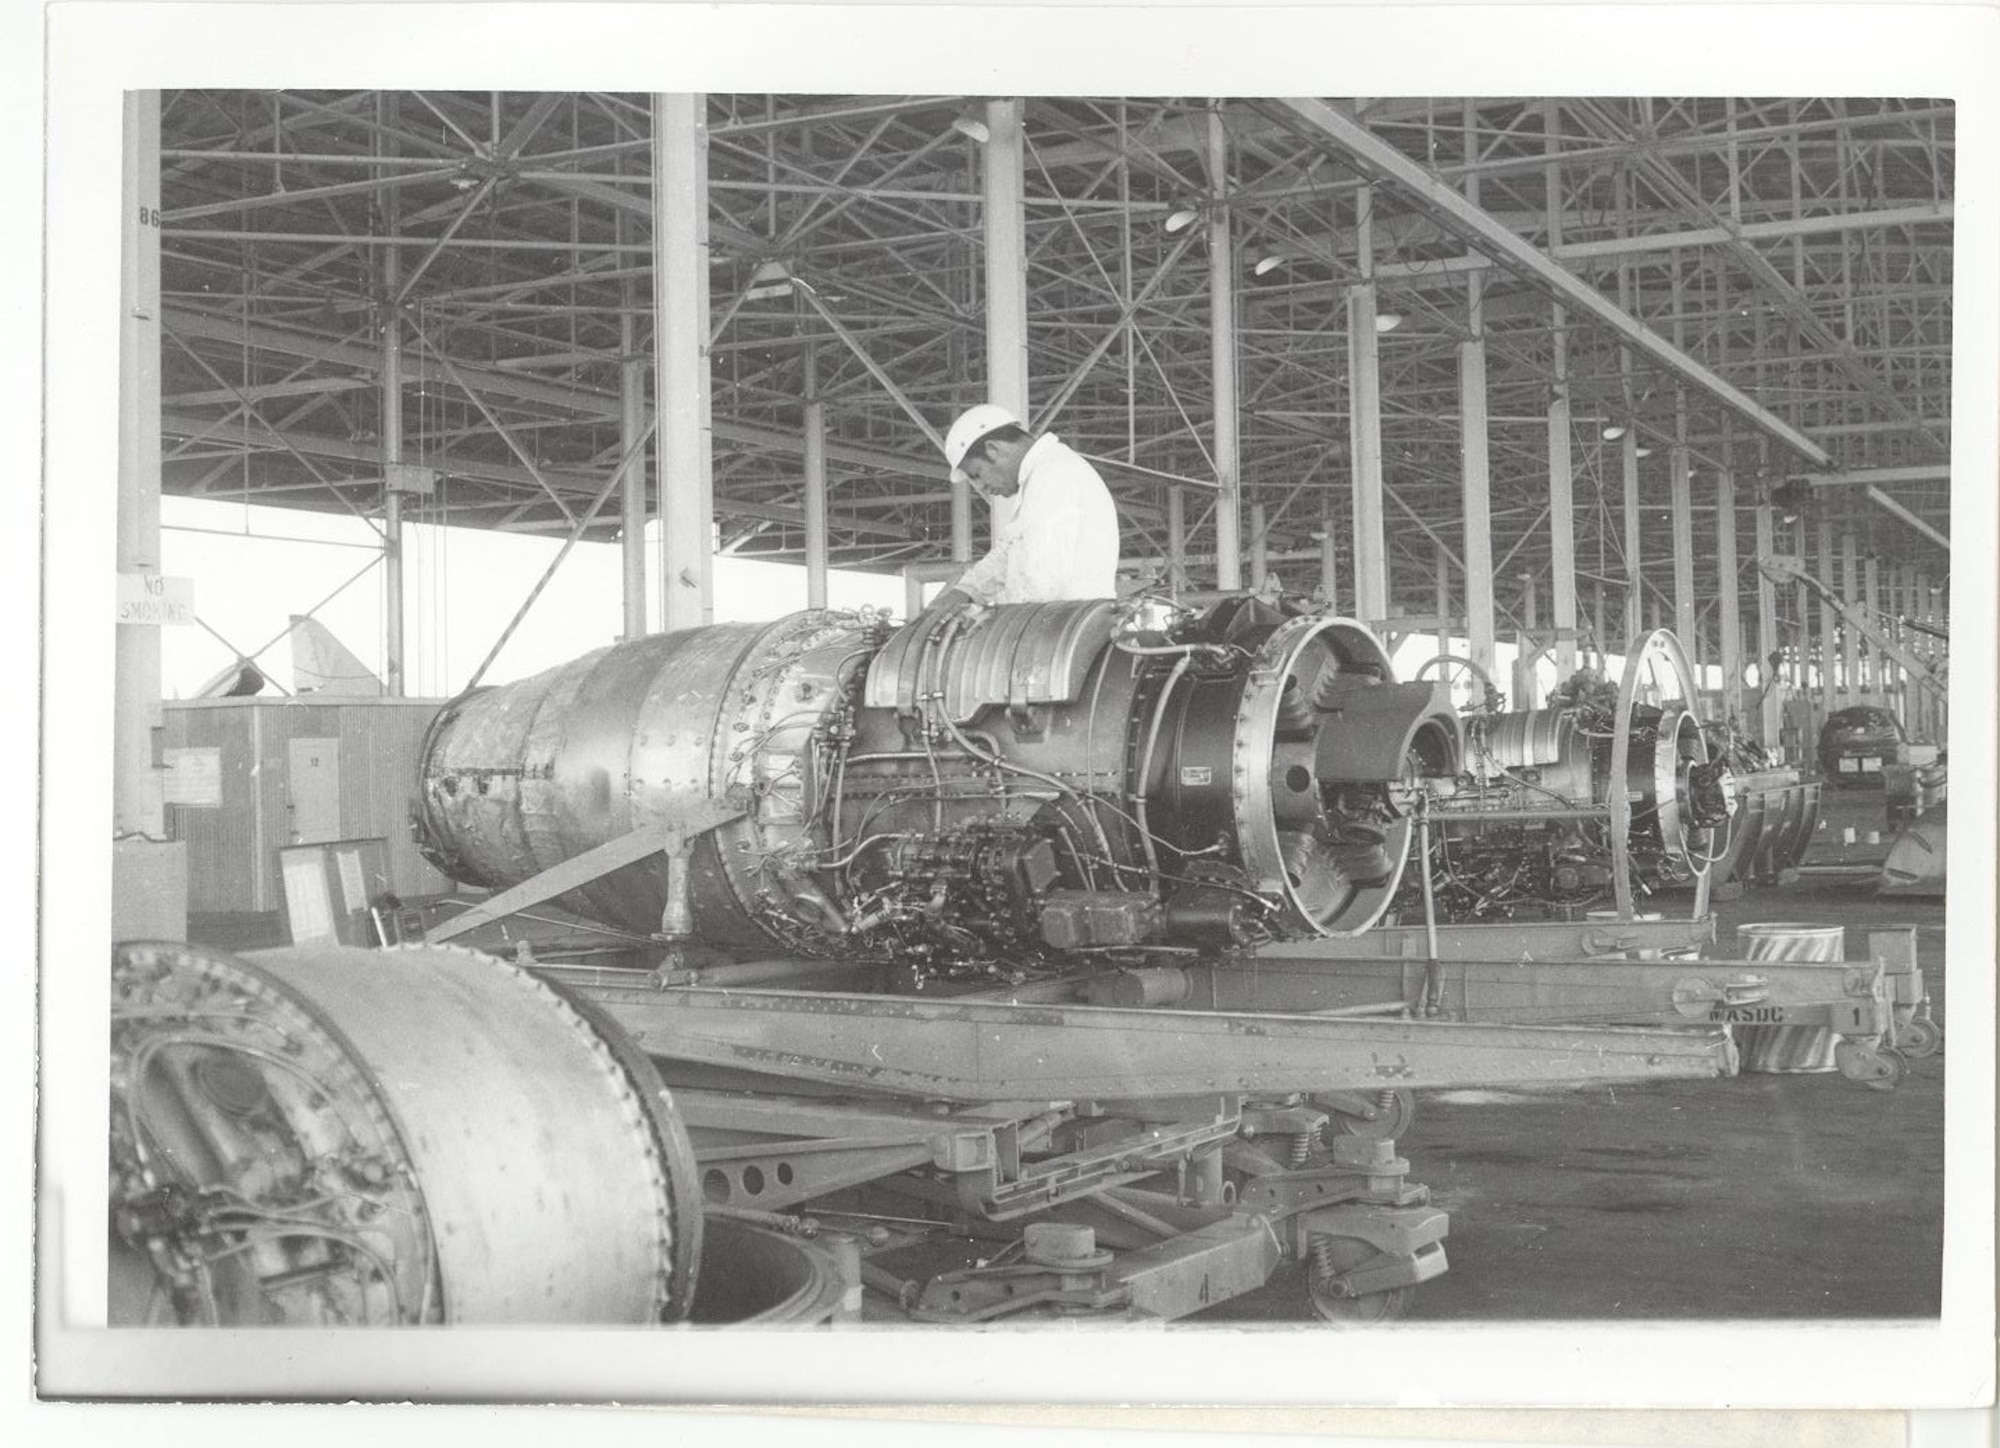 A photo of a service member working on a gas turbine.